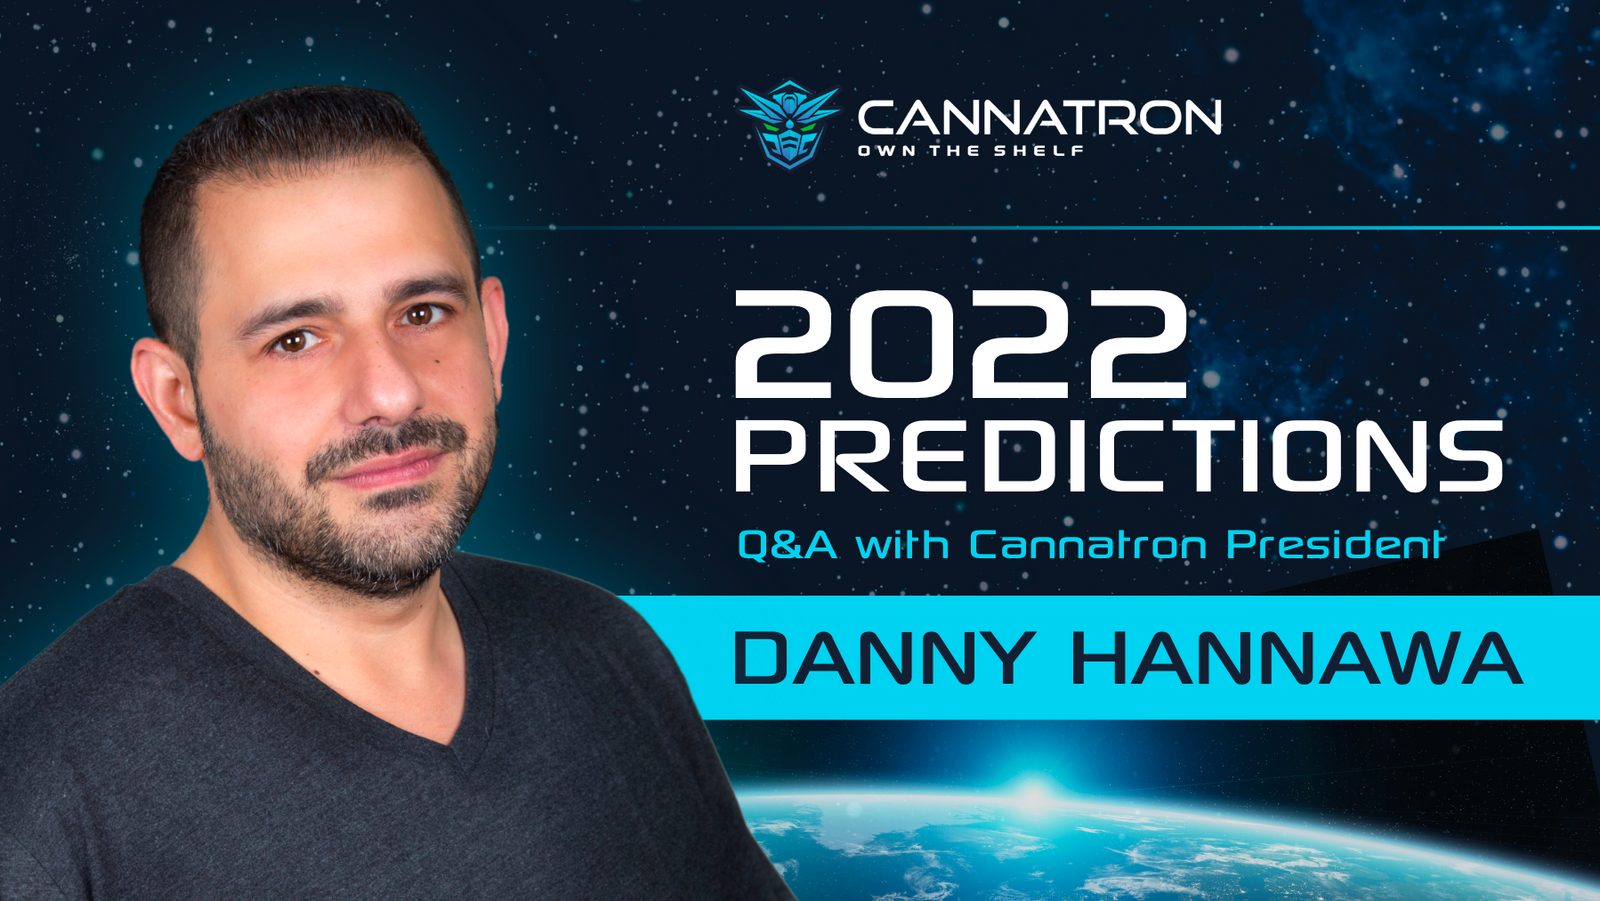 Q&A with Cannatron President: 2022 Predictions